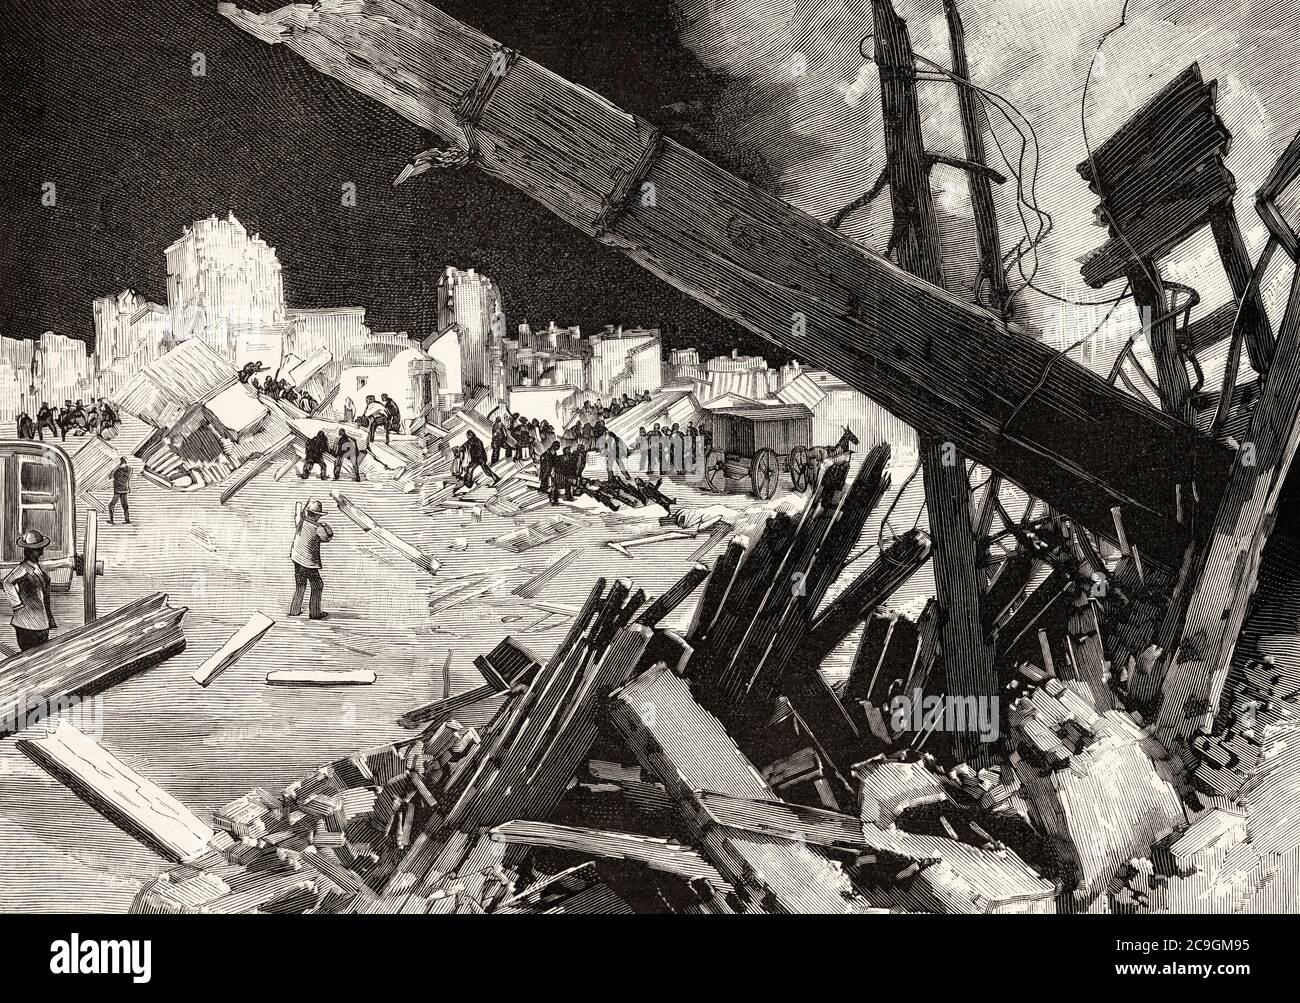 The middle Mississippi Valley tornado outbreak was a major tornado outbreak occurring in the middle United States on March 27, 1890. Old XIX century engraved illustration from La Ilustracion Española y Americana 1890 Stock Photo